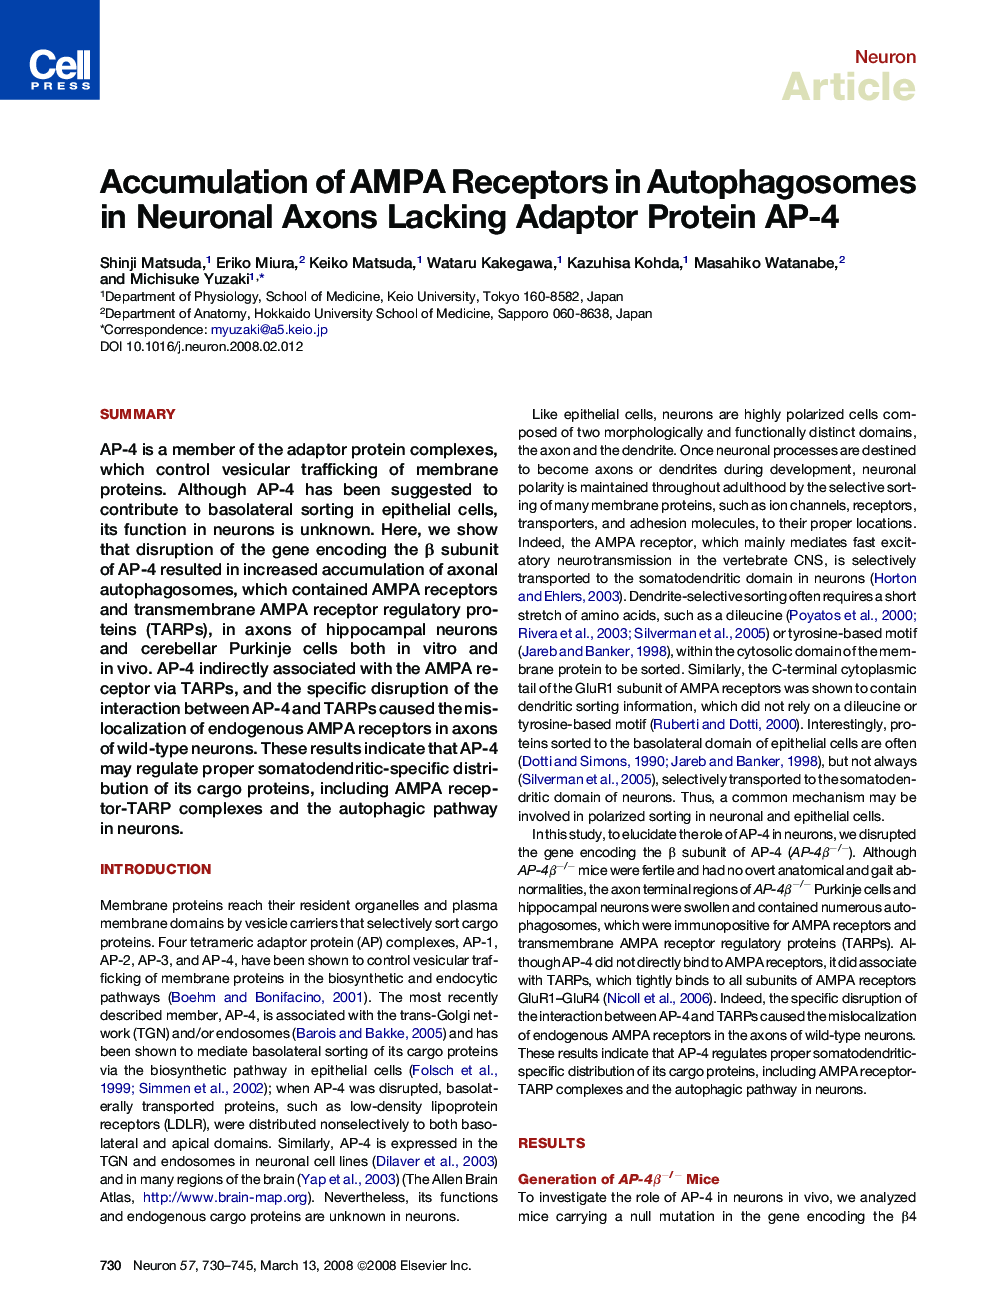 Accumulation of AMPA Receptors in Autophagosomes in Neuronal Axons Lacking Adaptor Protein AP-4